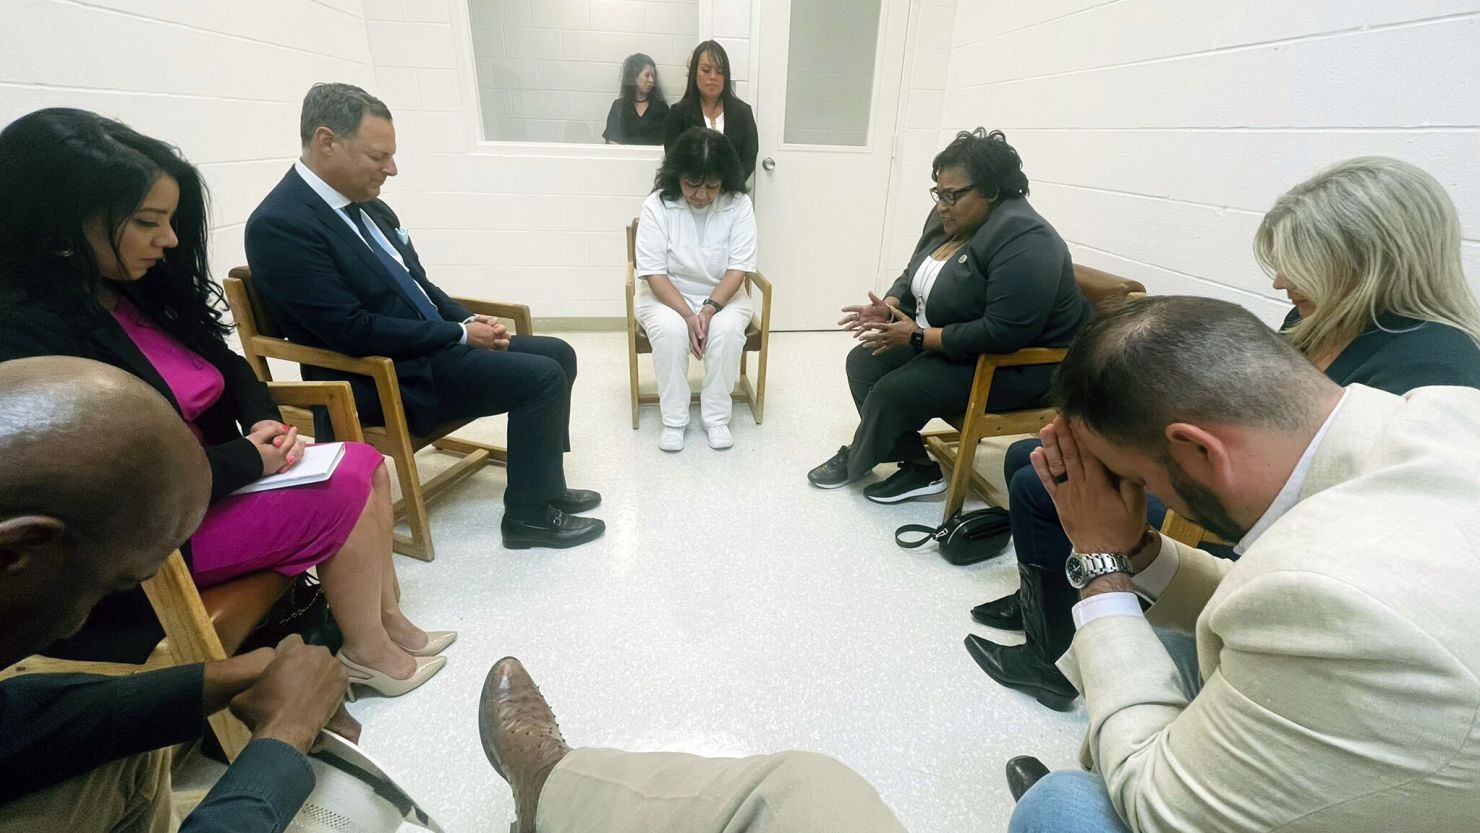 Texas death row inmate Melissa Lucio, dressed in white, leads seven Texas lawmakers in prayer in April 2022 at the Mountain View Unit in Gatesville.